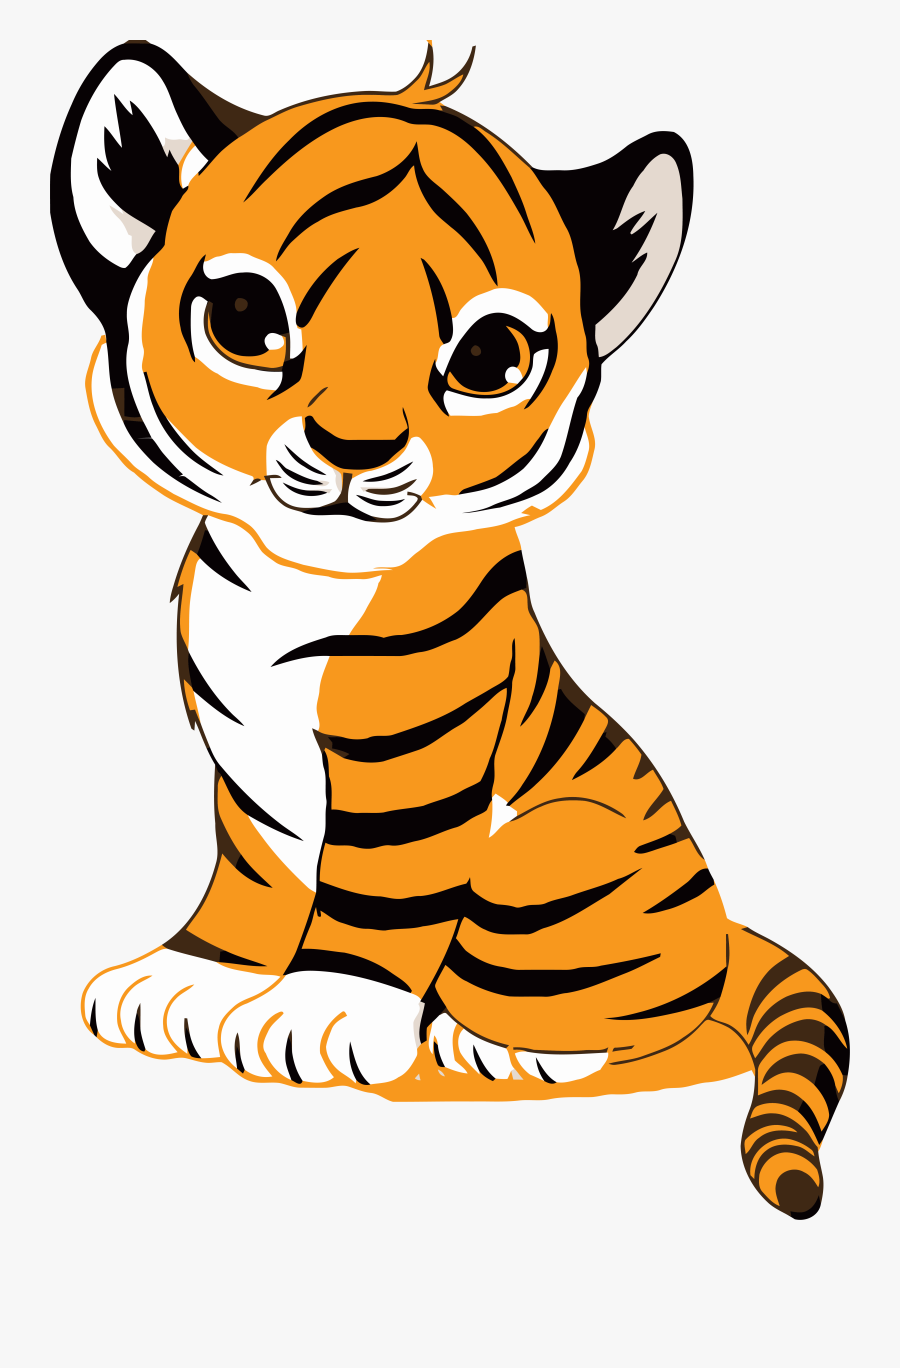 Tiger Face Clip Art Royalty Free Tiger Illustration - Cute Tiger Drawing Easy, Transparent Clipart